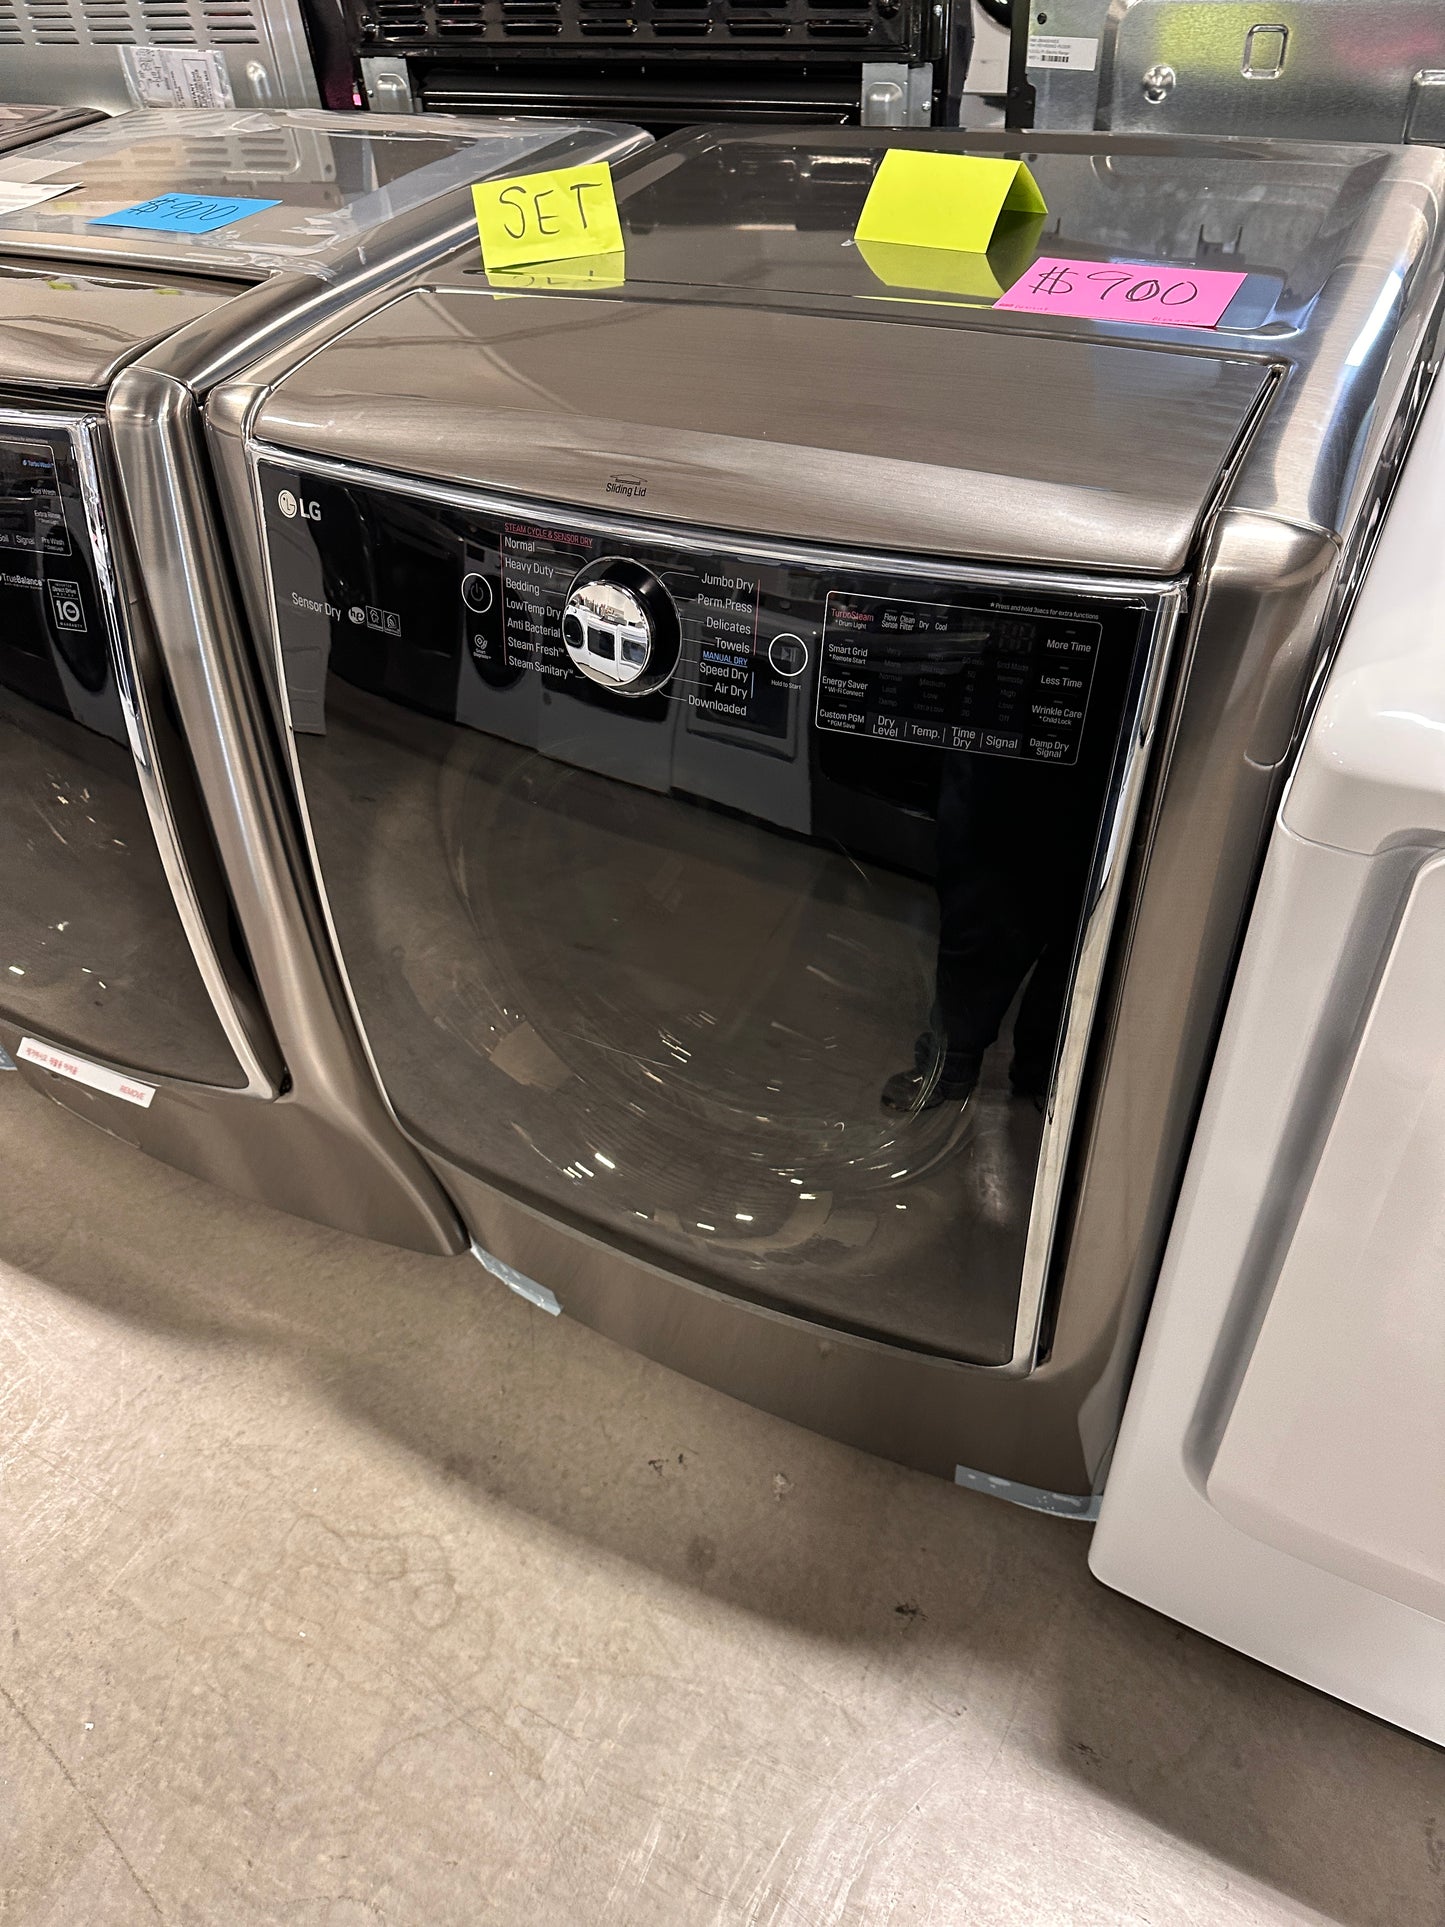 BEAUTIFUL NEW GRAPHITE STEEL ELECTRIC DRYER - DRY12086